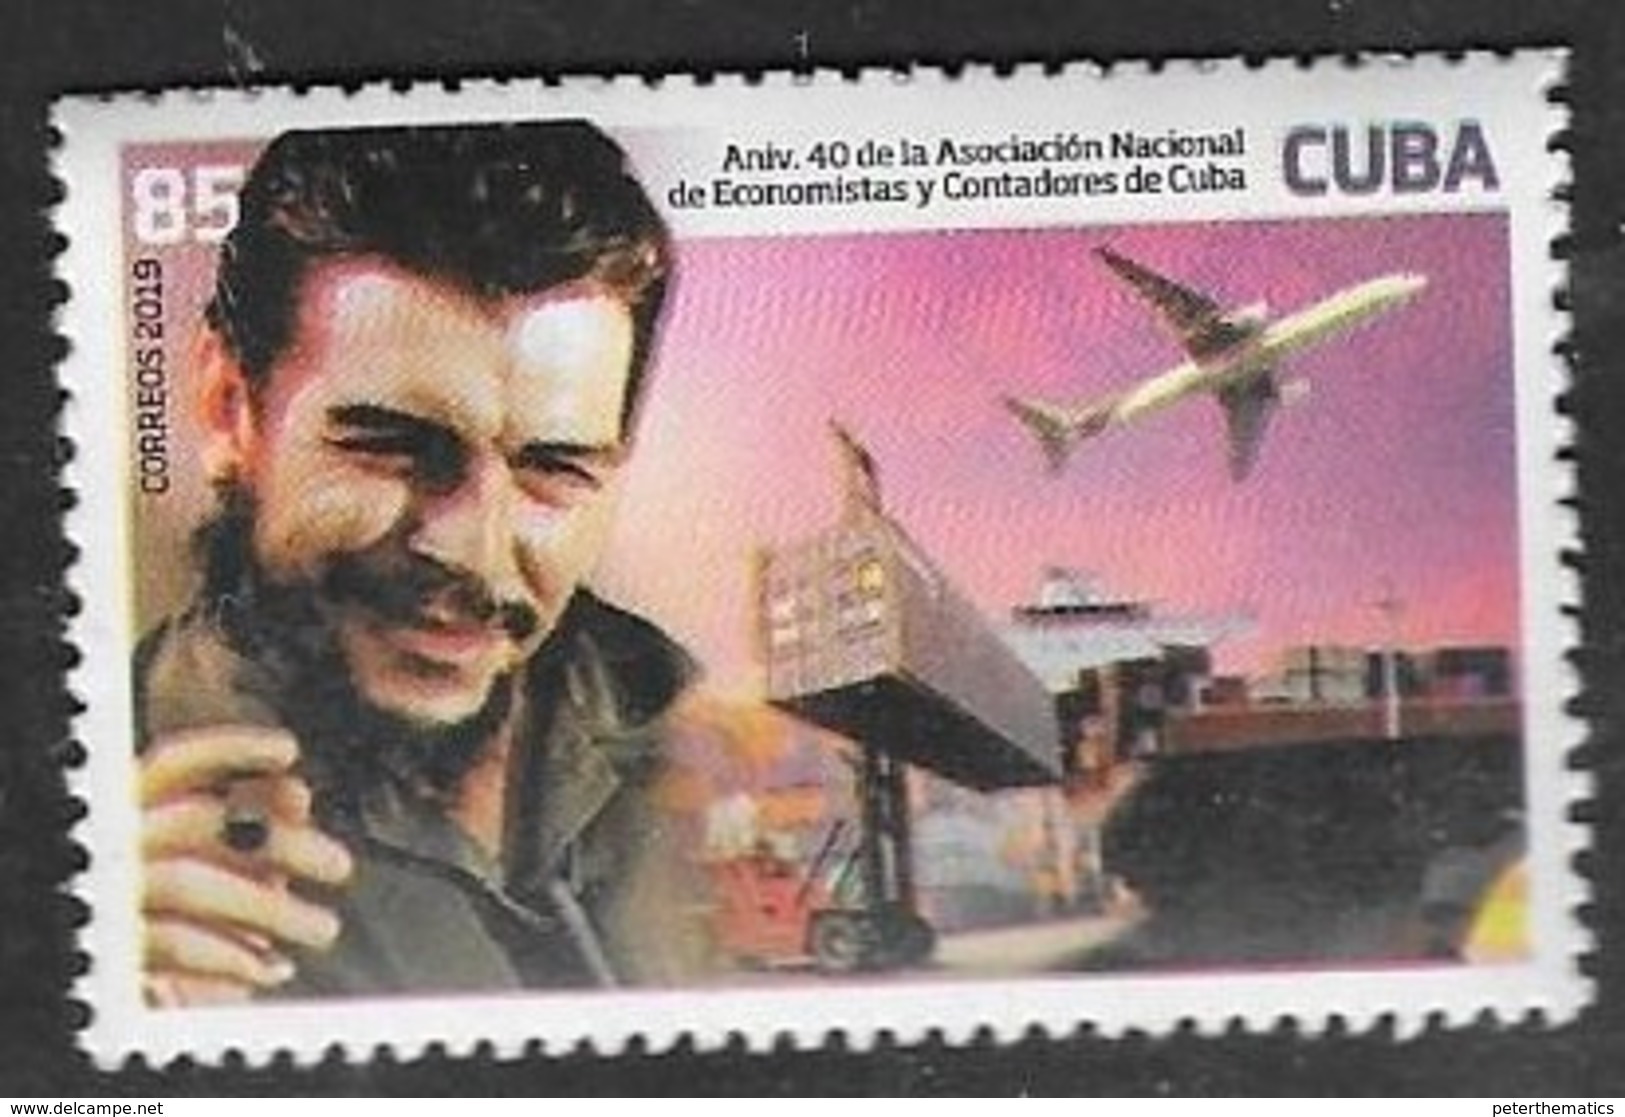 FAMOUS LEADERS, 2019, MNH, ECONOMISTS, ACCOUNTANTS, PLANES, SHIPS, PORTS, FORK LIFTS, CIGARS,  1v - Airplanes